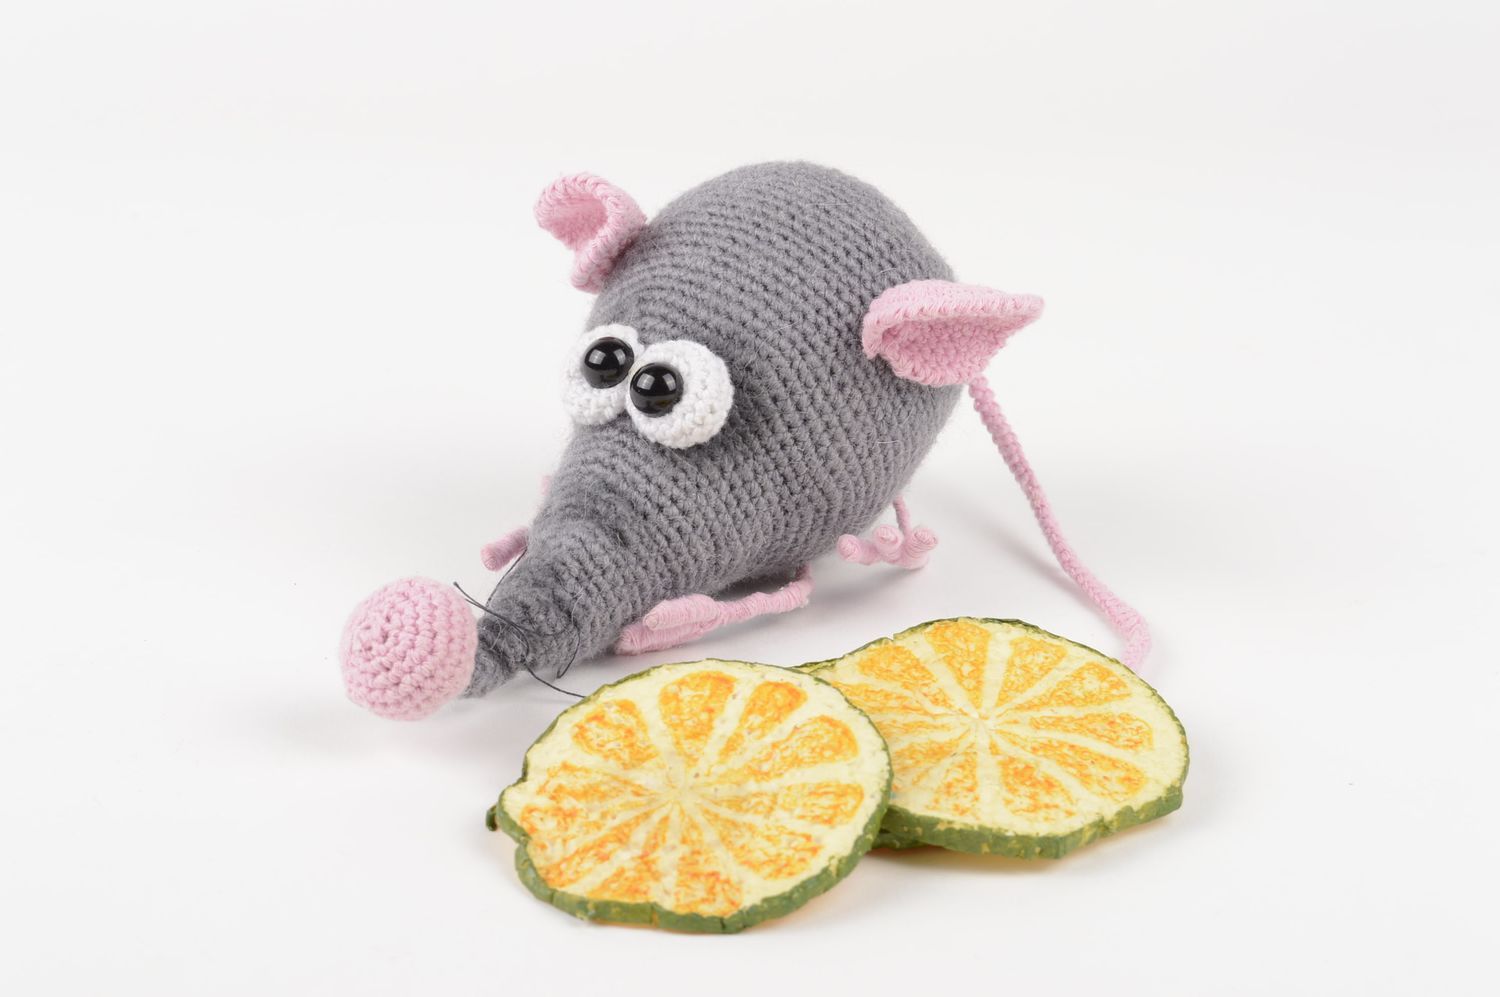 Handmade crocheted soft toy designer textile toy unusual stylish toy for kids photo 1